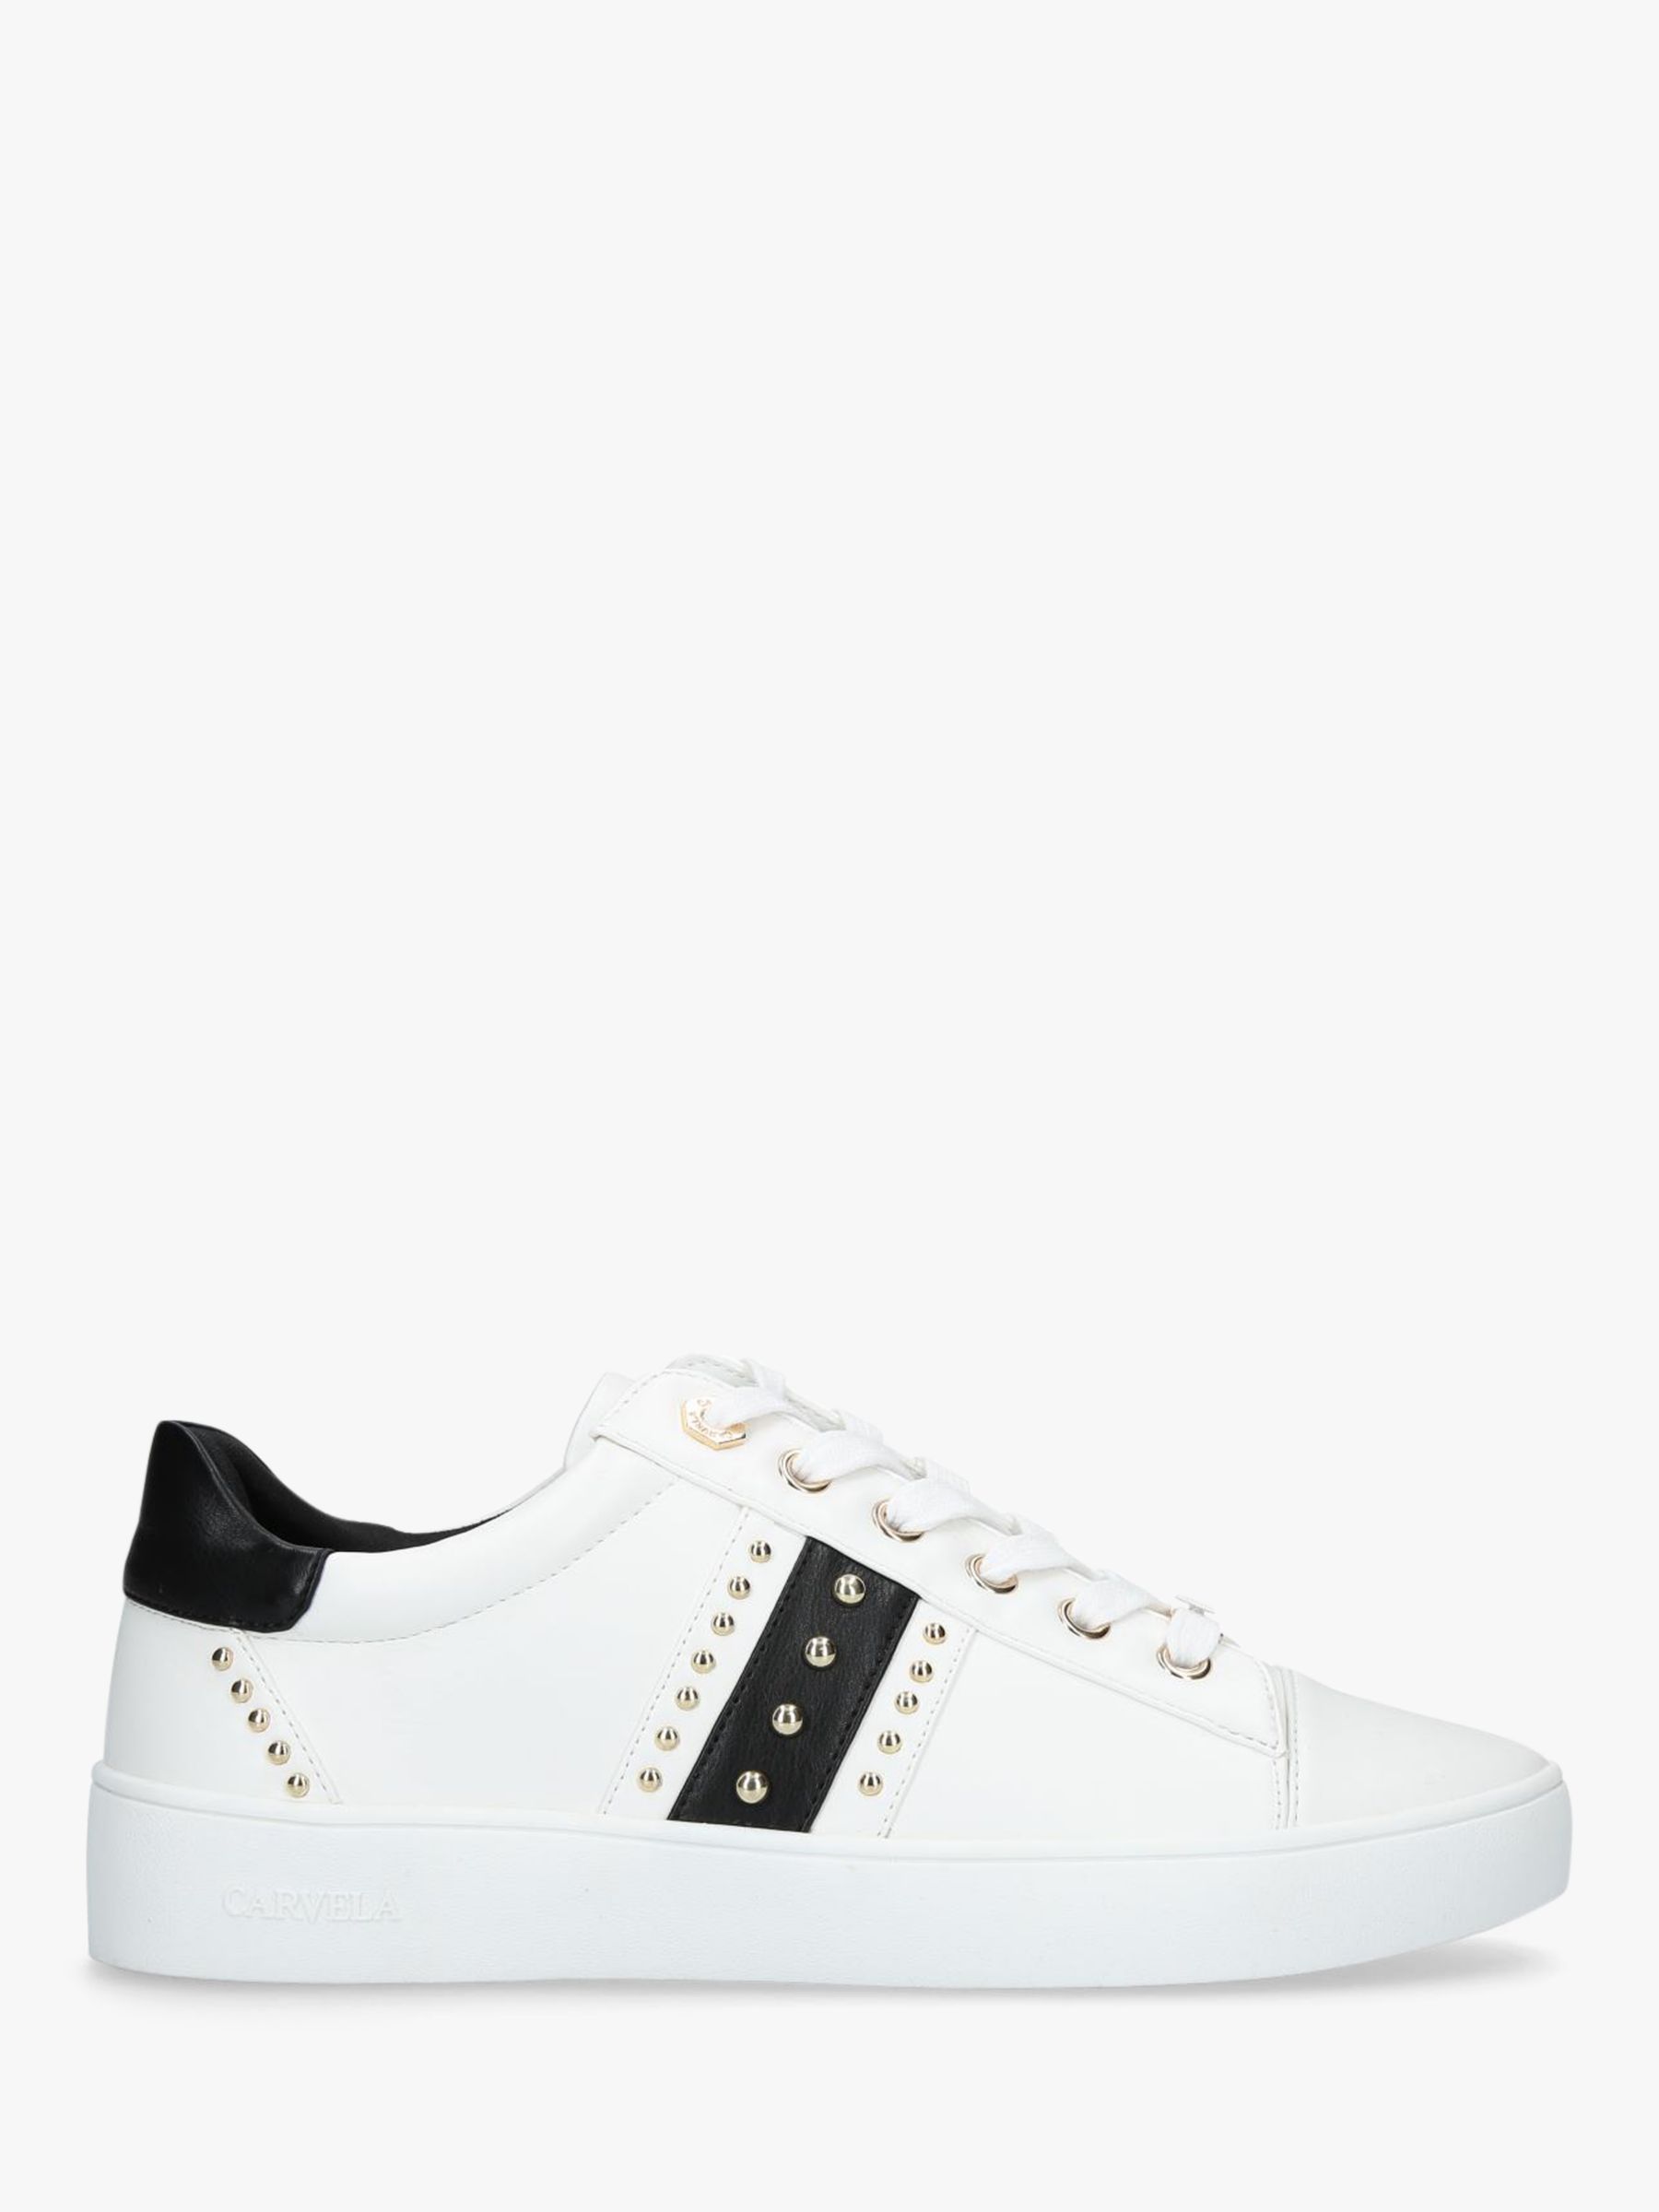 Carvela Jargon Studded Low Top Trainers at John Lewis & Partners